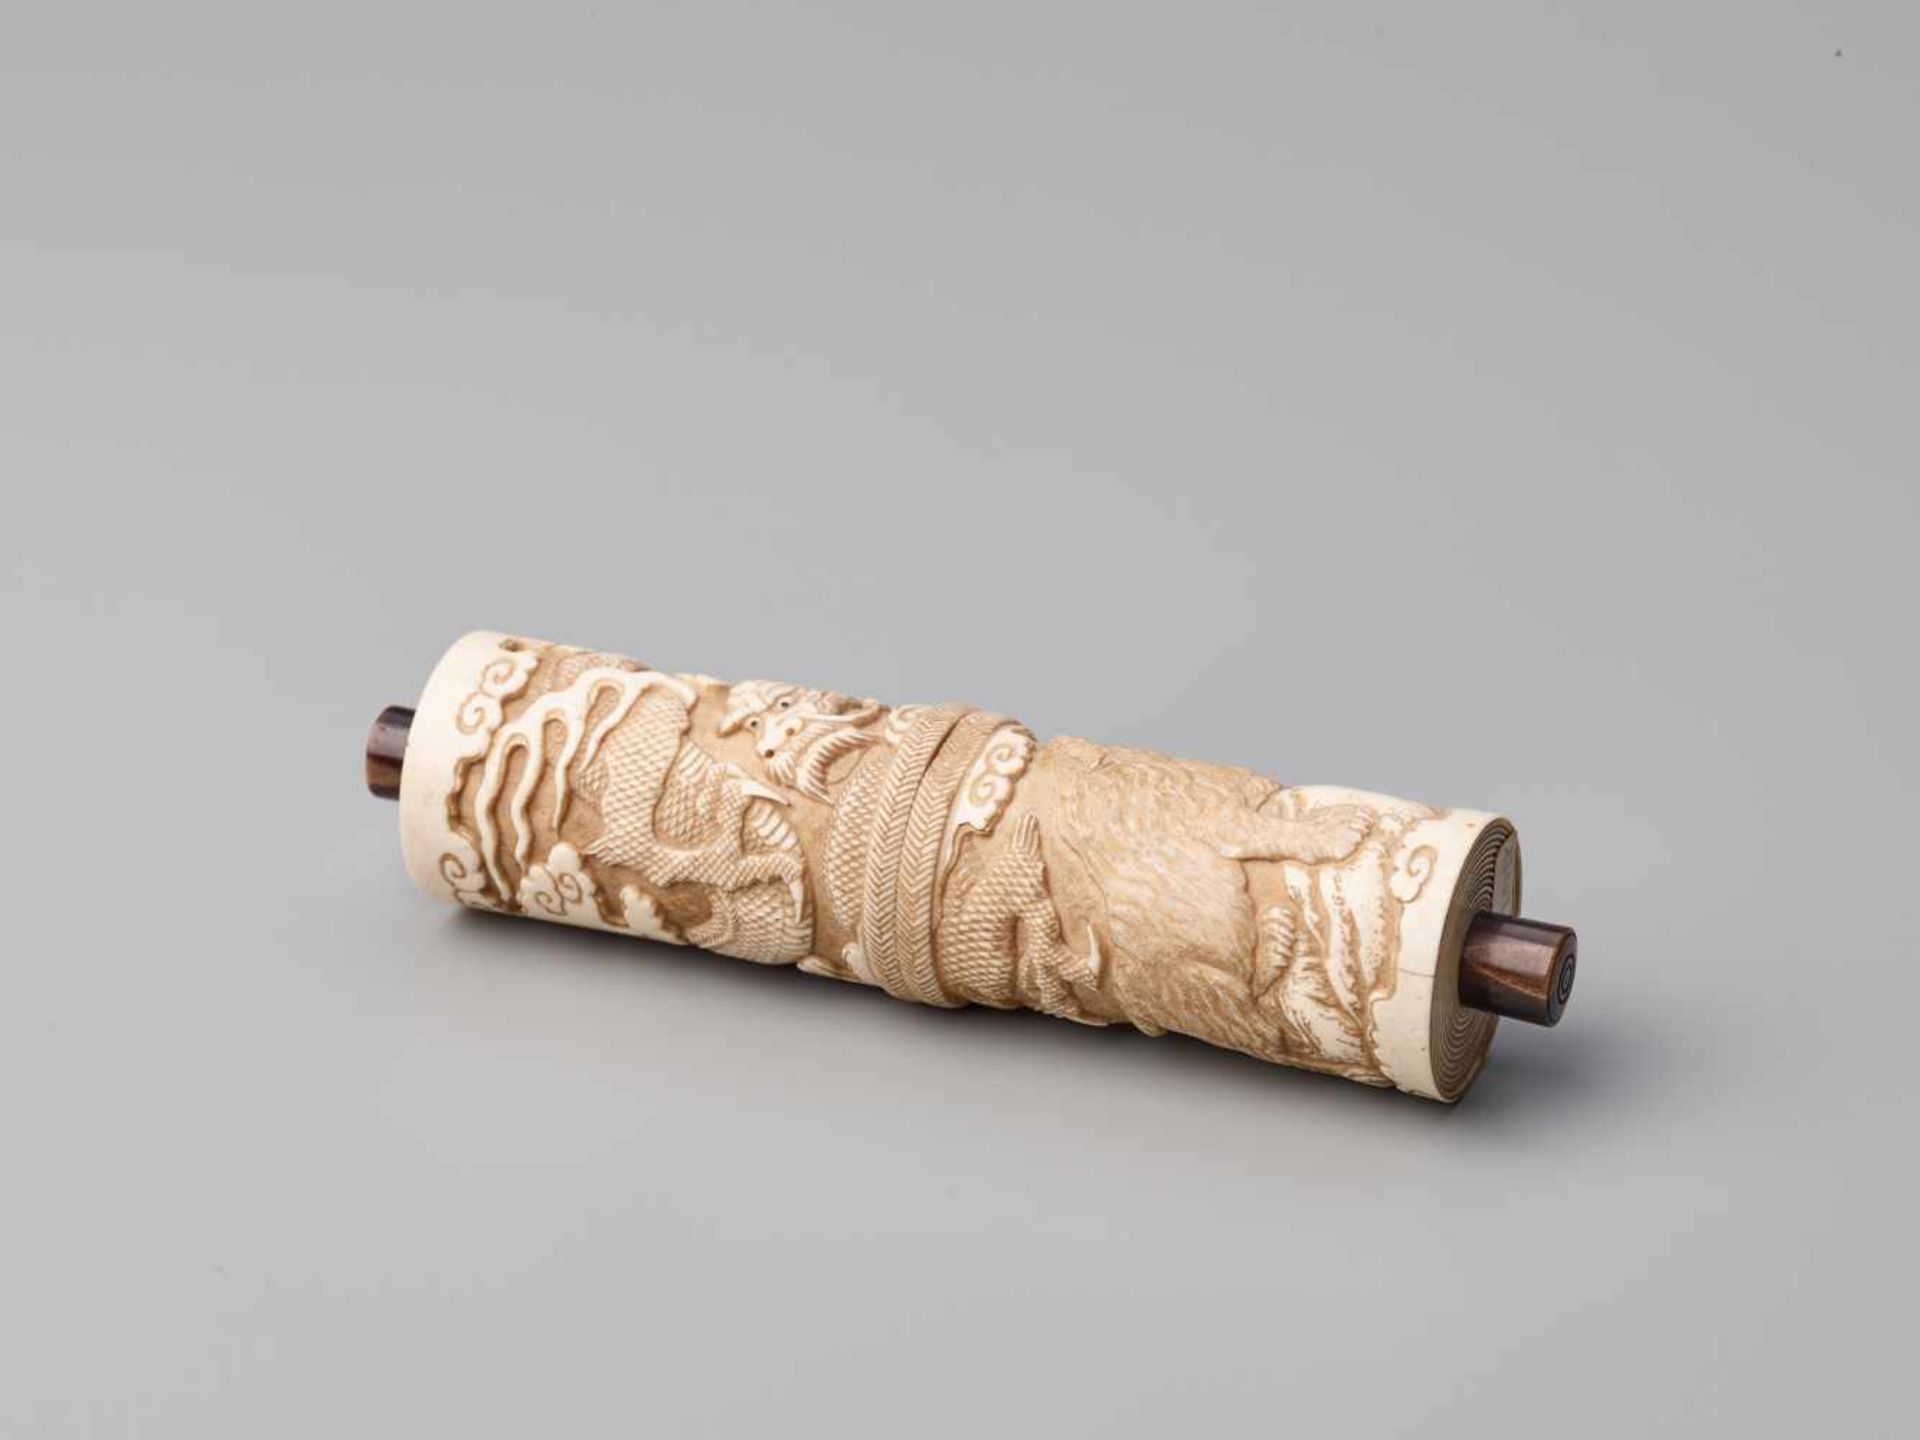 A RARE JAPANESE STAG ANTLER SCROLL CASE FOR A BUDDHIST SUTRA WITH DRAGON AND TIGERStag antler with - Image 10 of 12